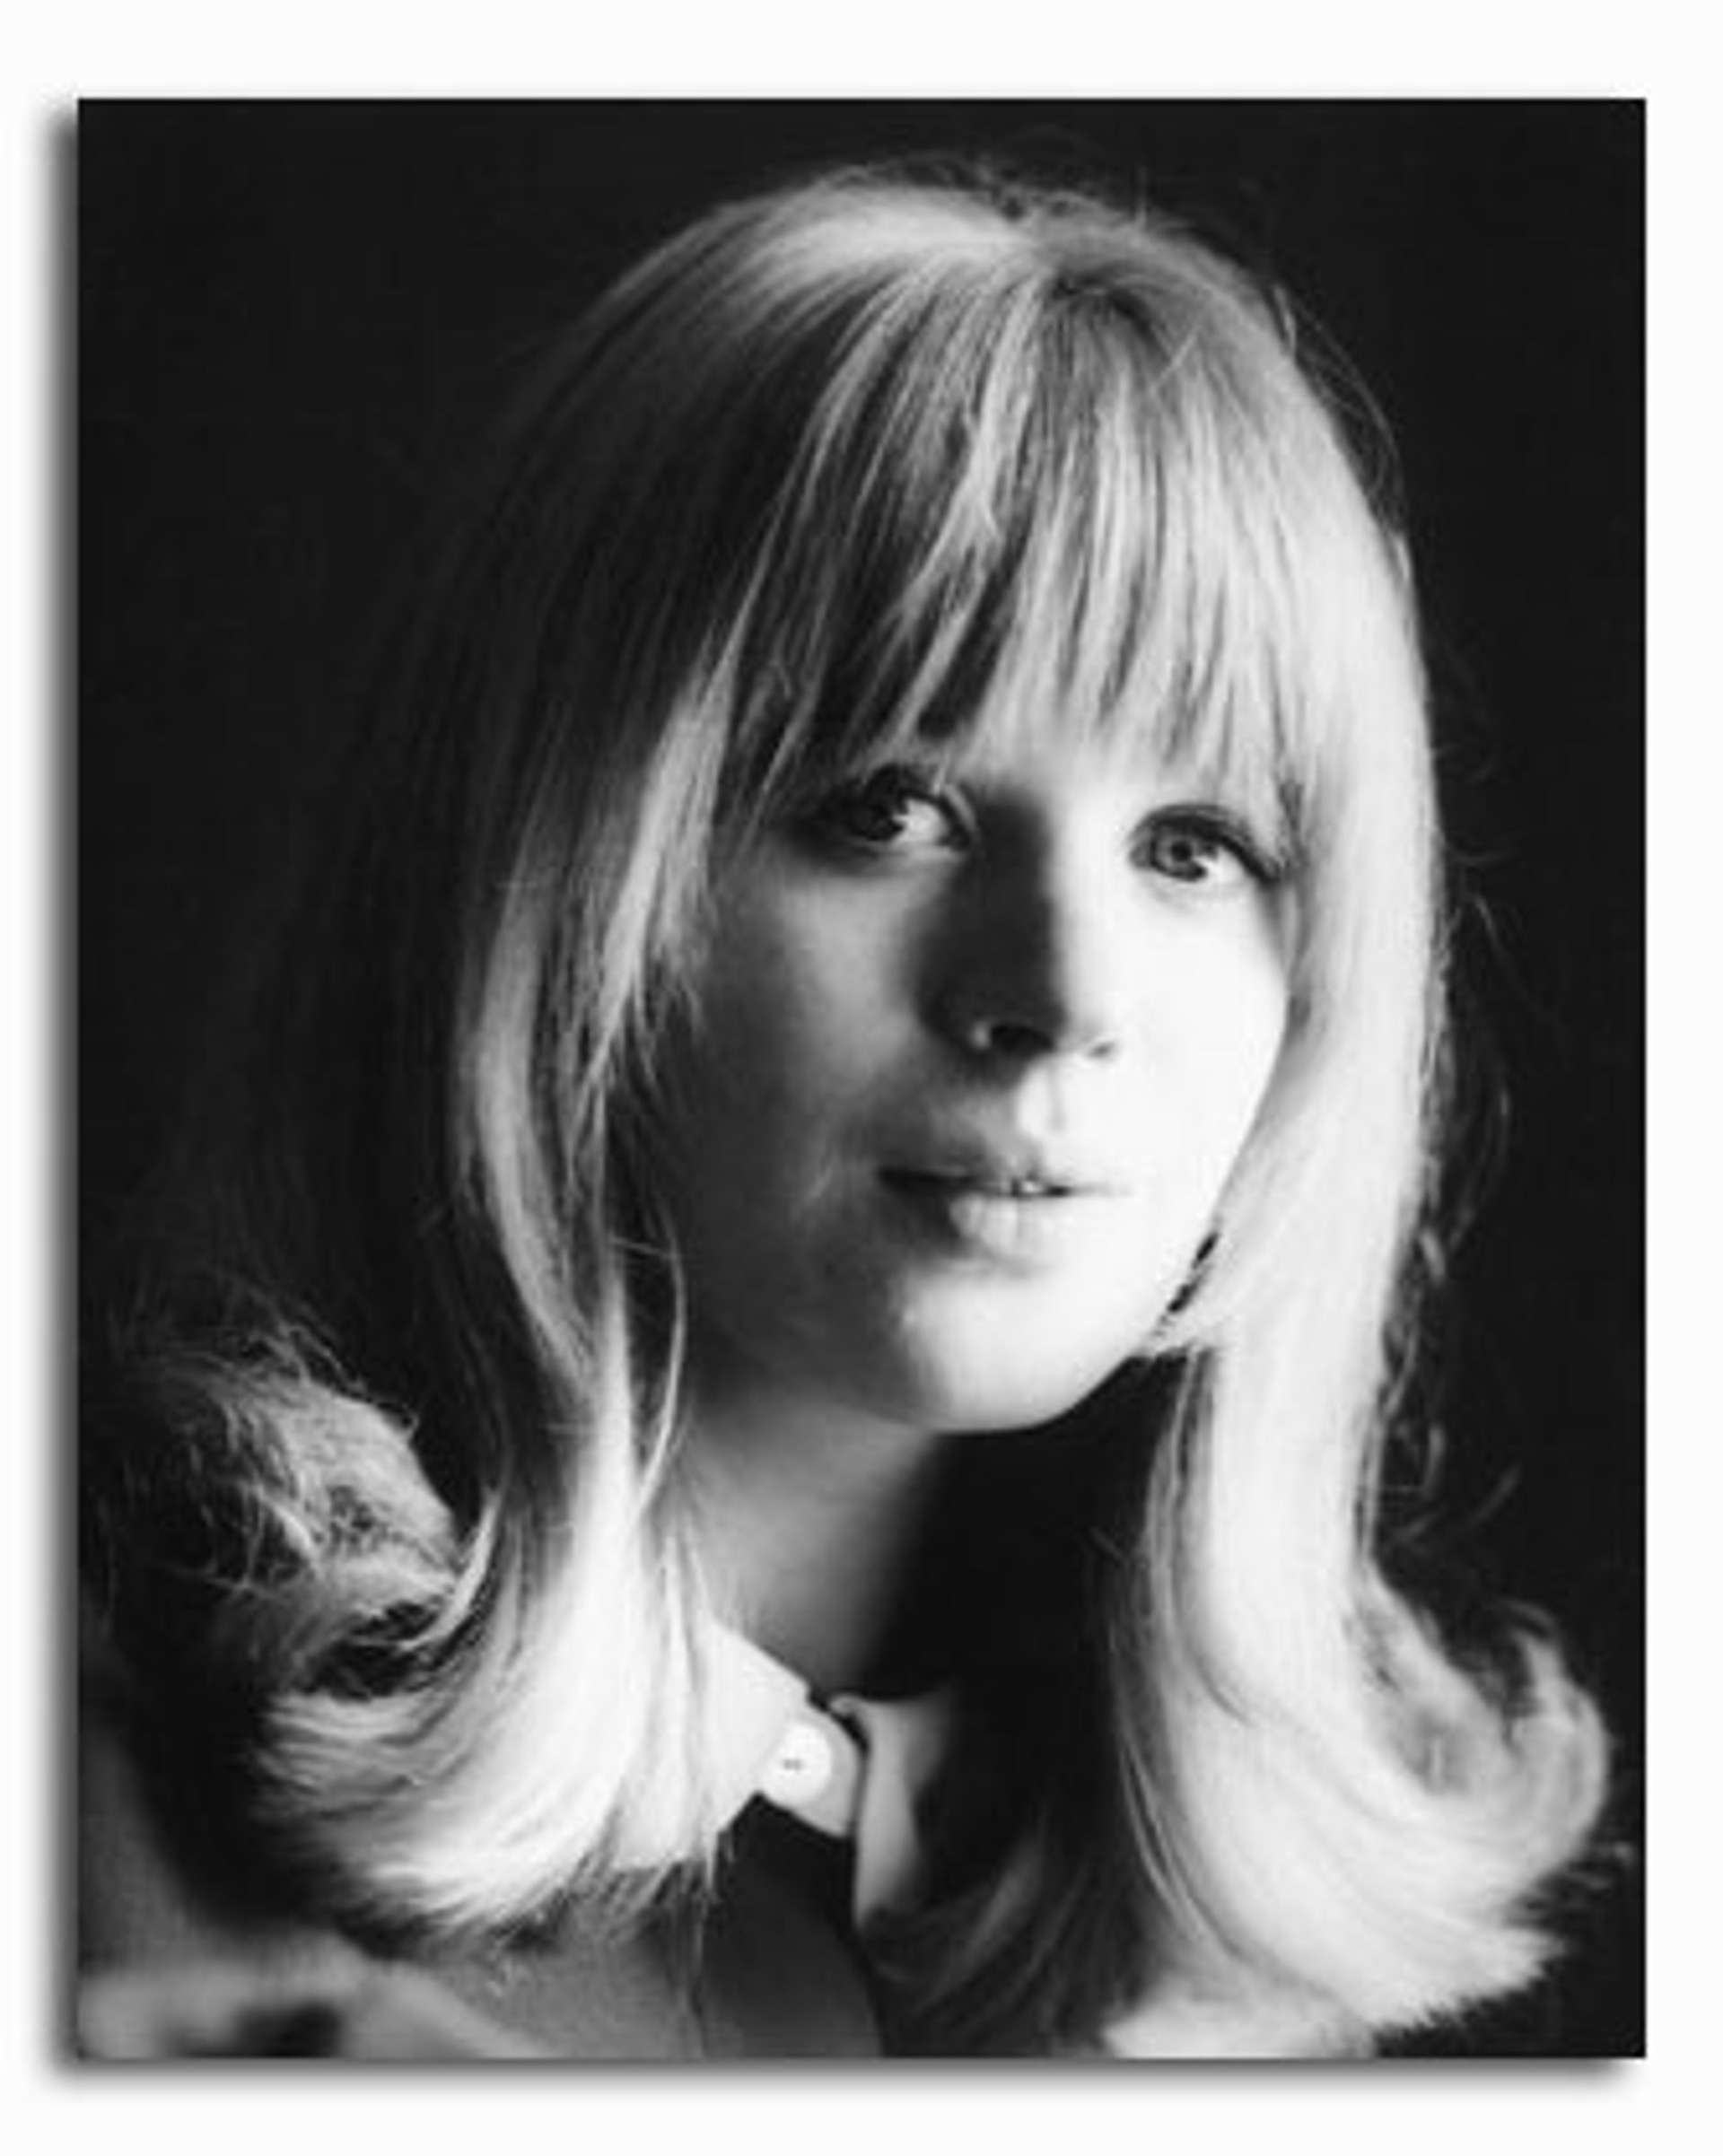 (SS3003143) Music picture of Marianne Faithfull buy celebrity photos ...